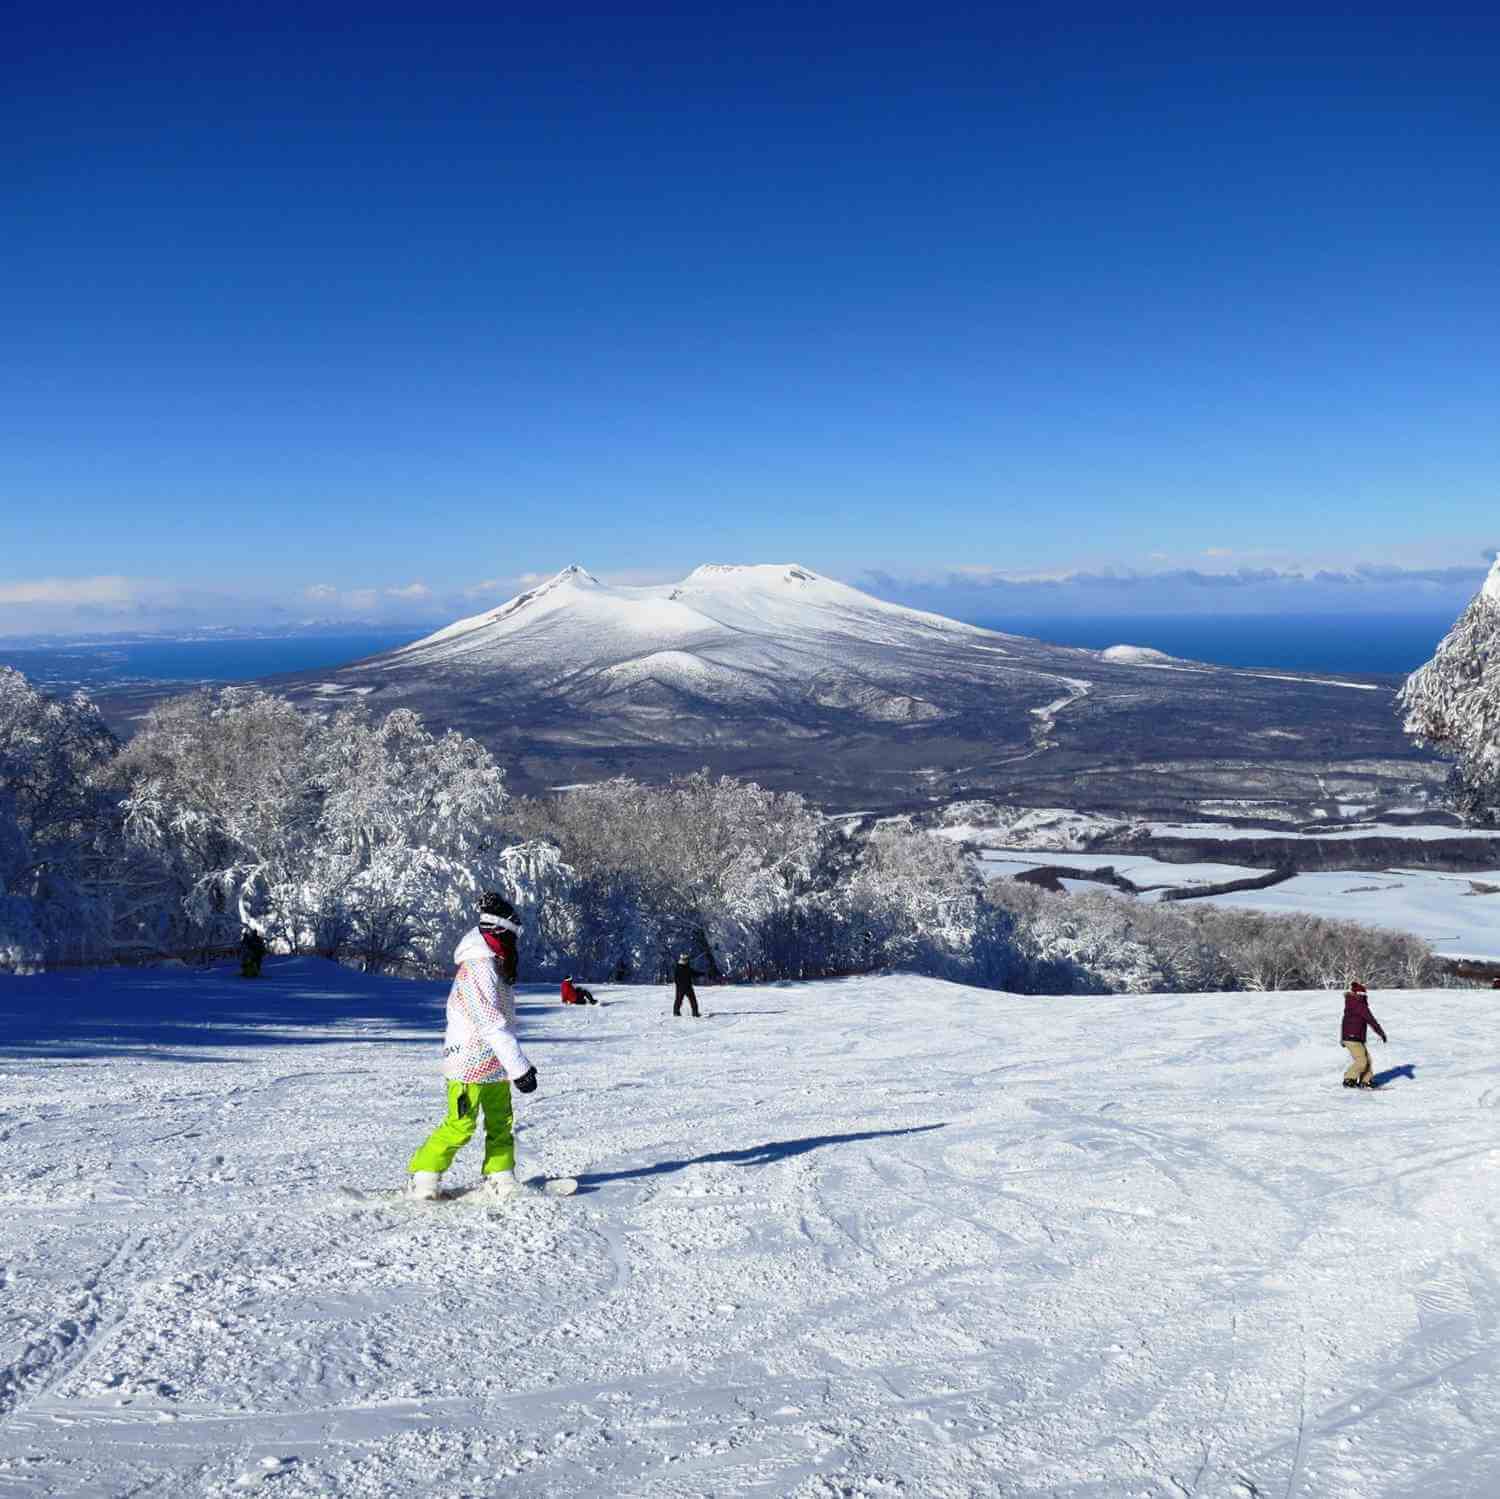 You can enjoy skiing and snowboarding at Onuma Park in the suburbs of Hakodate = Shutterstock